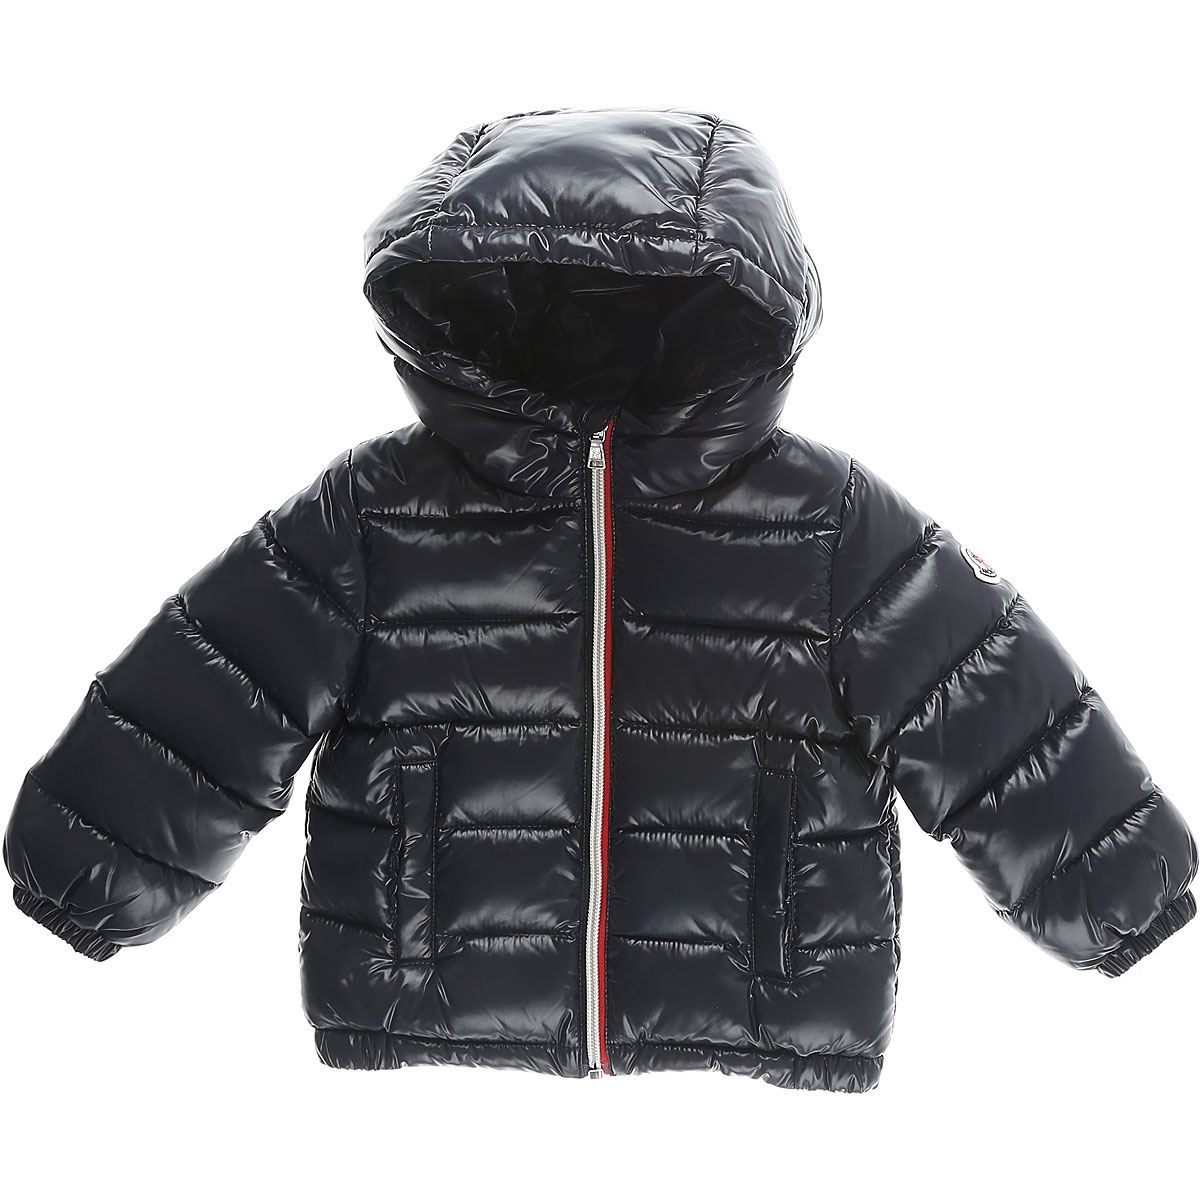 Baby Boy Clothing Moncler, Style code: 4183605-68950-742